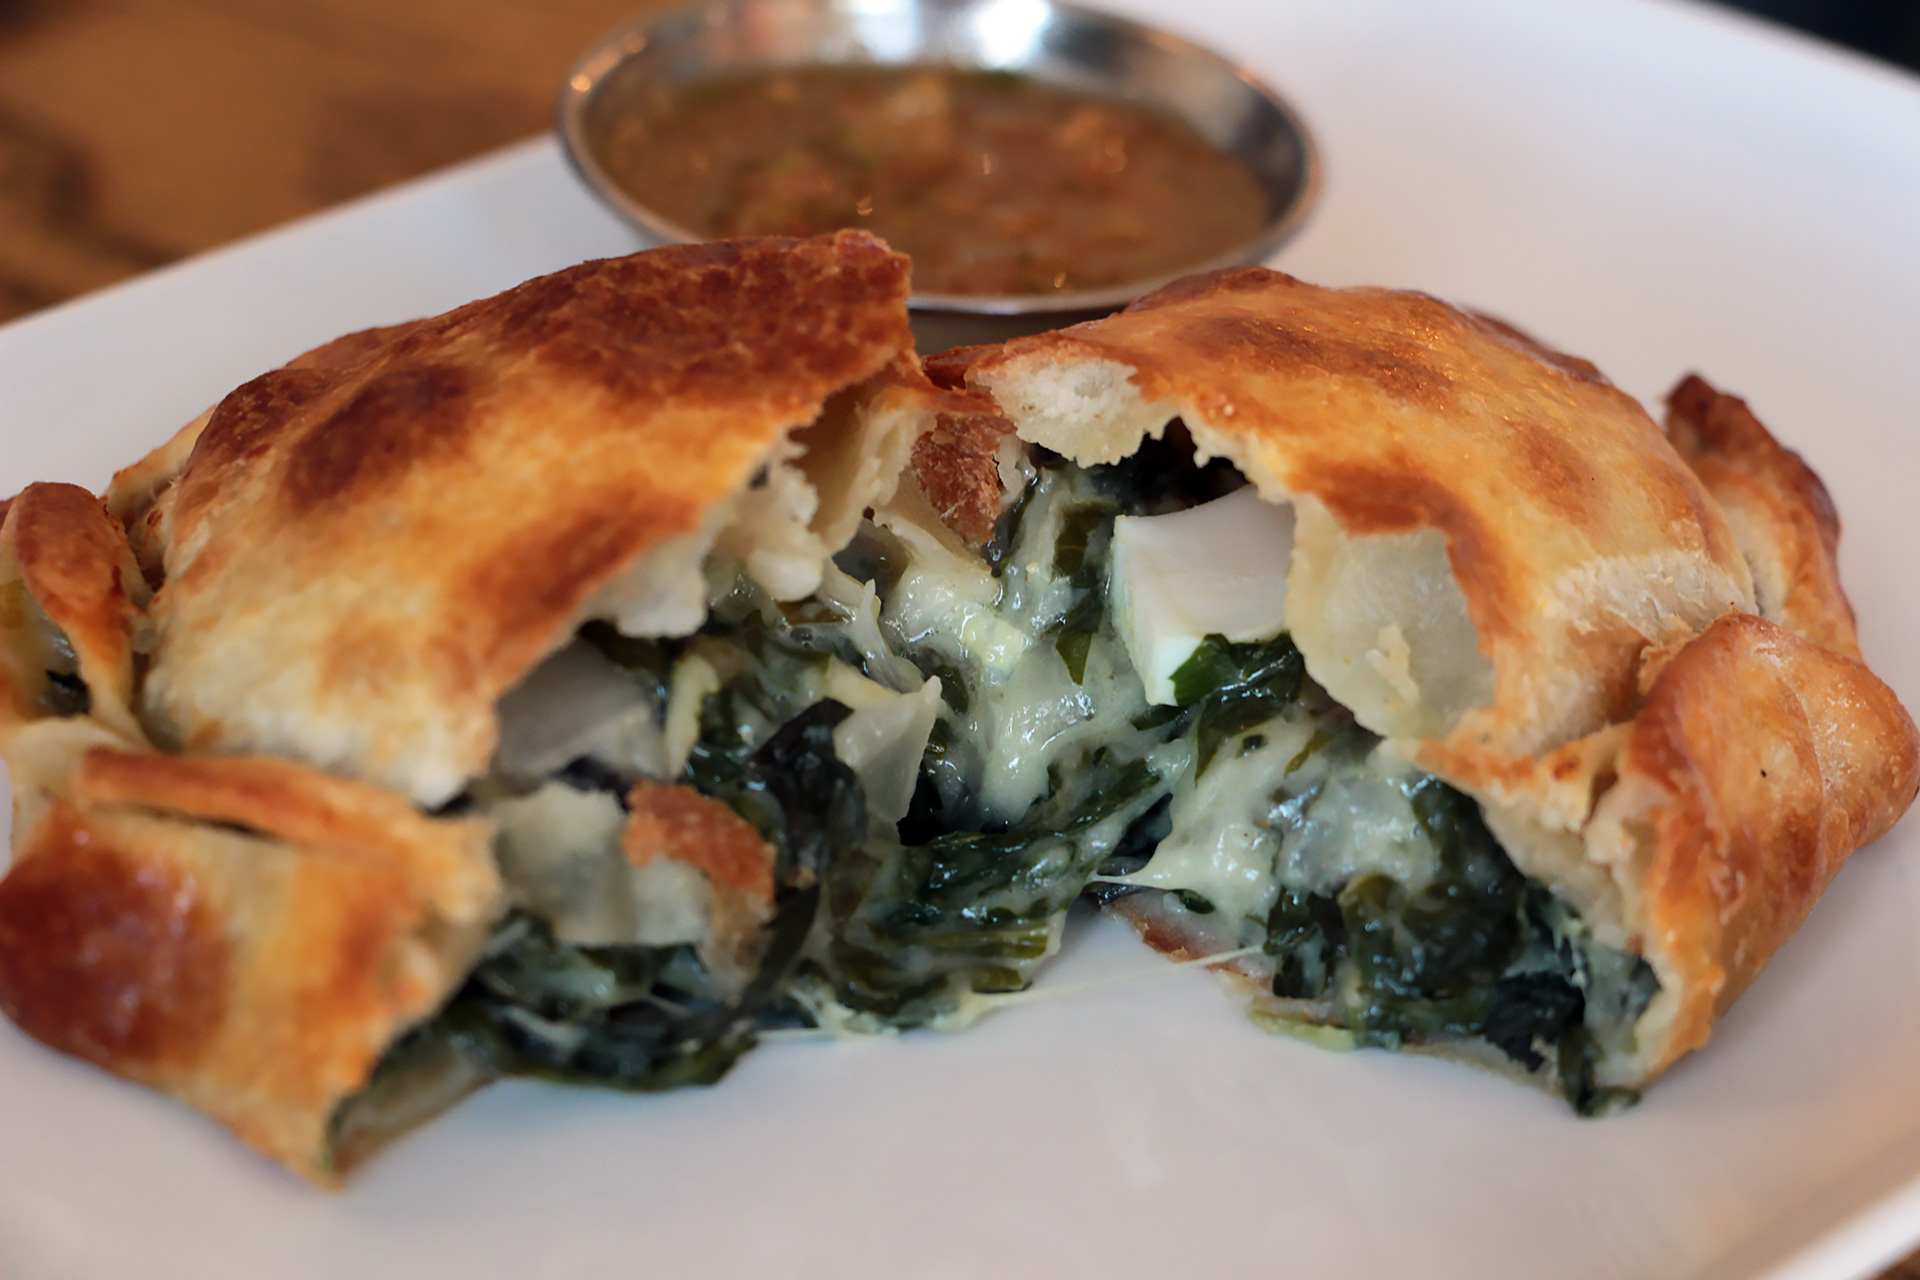 The Verde includes with Swiss chard, spinach, onion, cheese sauce, olive and egg.